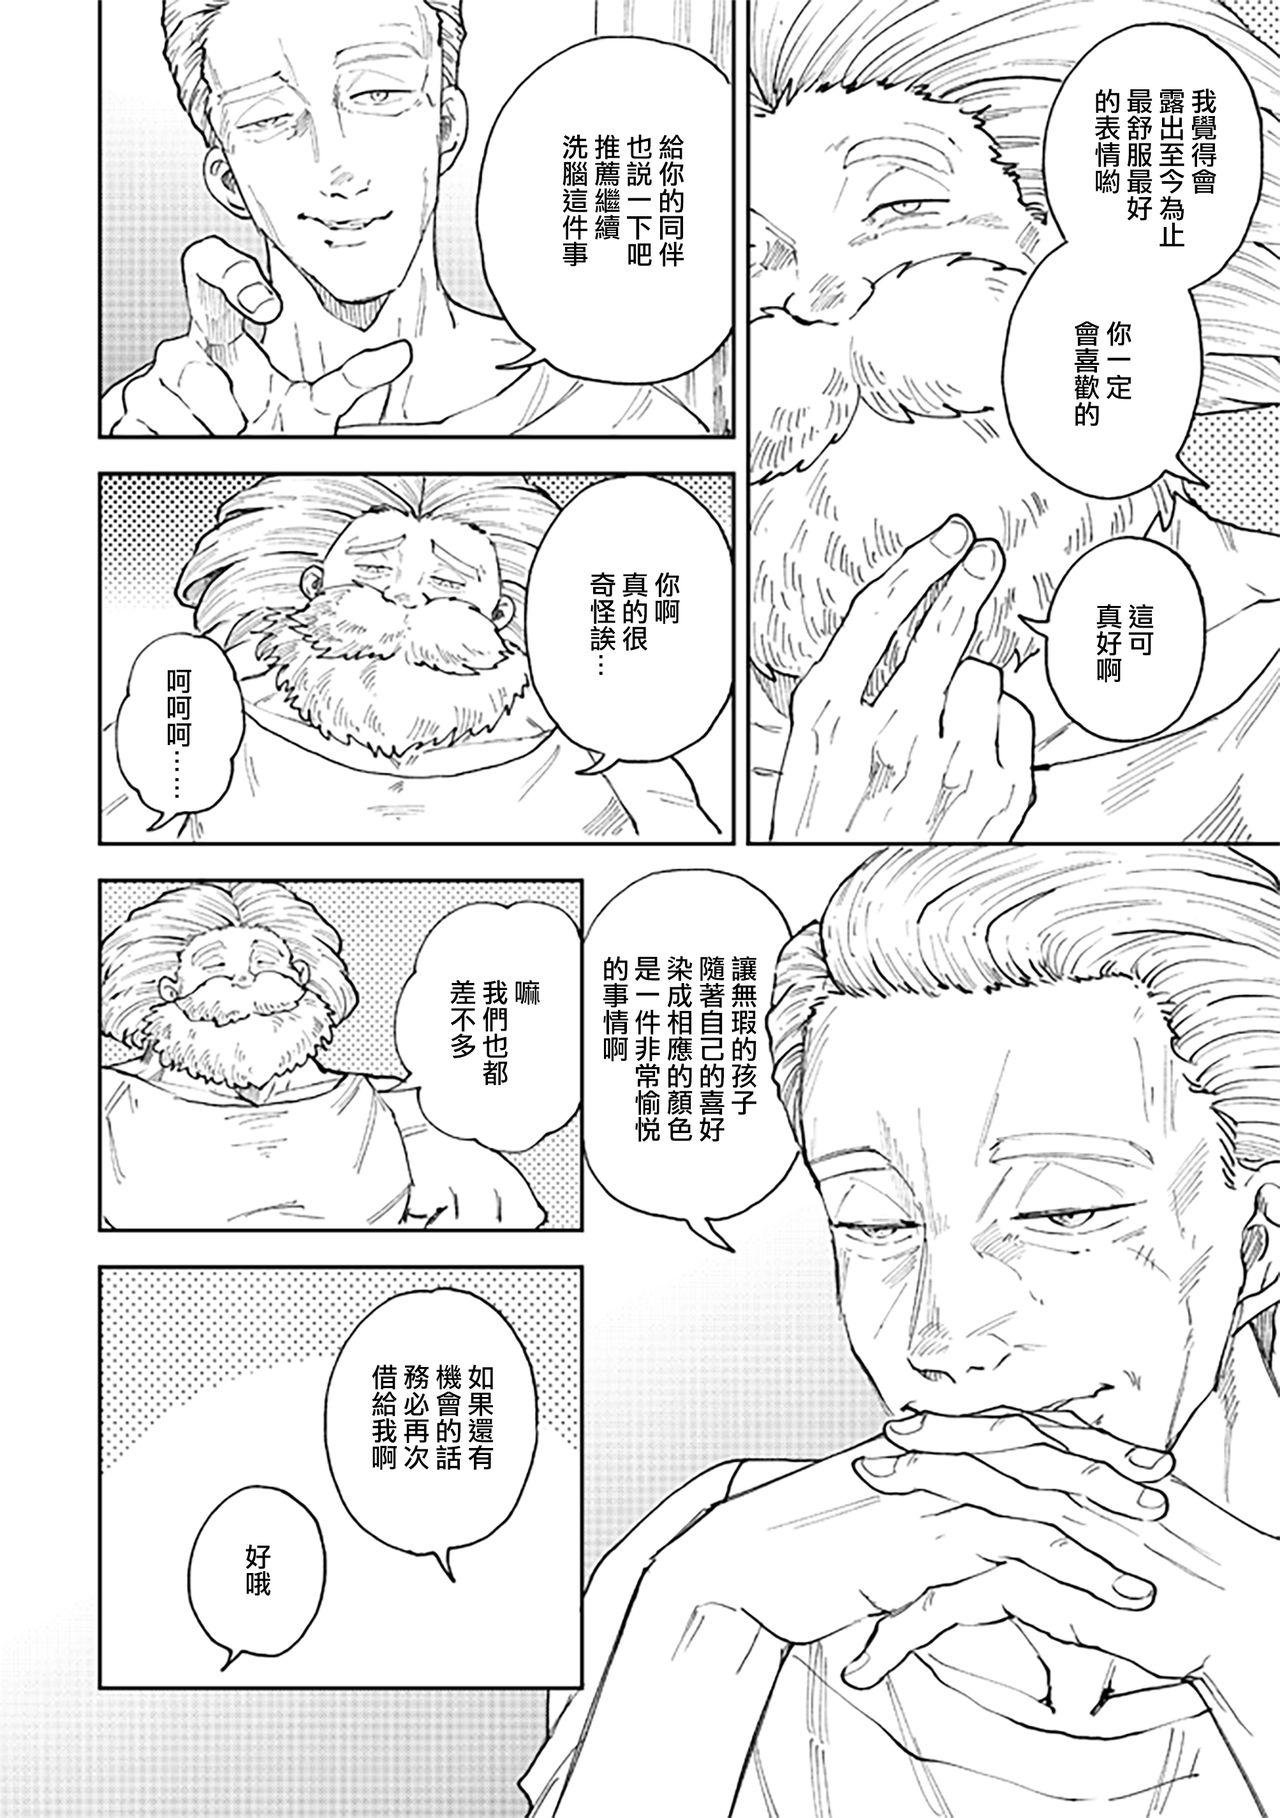 Pussy Eating Rental Kamyu-kun 7 day - Dragon quest xi Perverted - Page 9